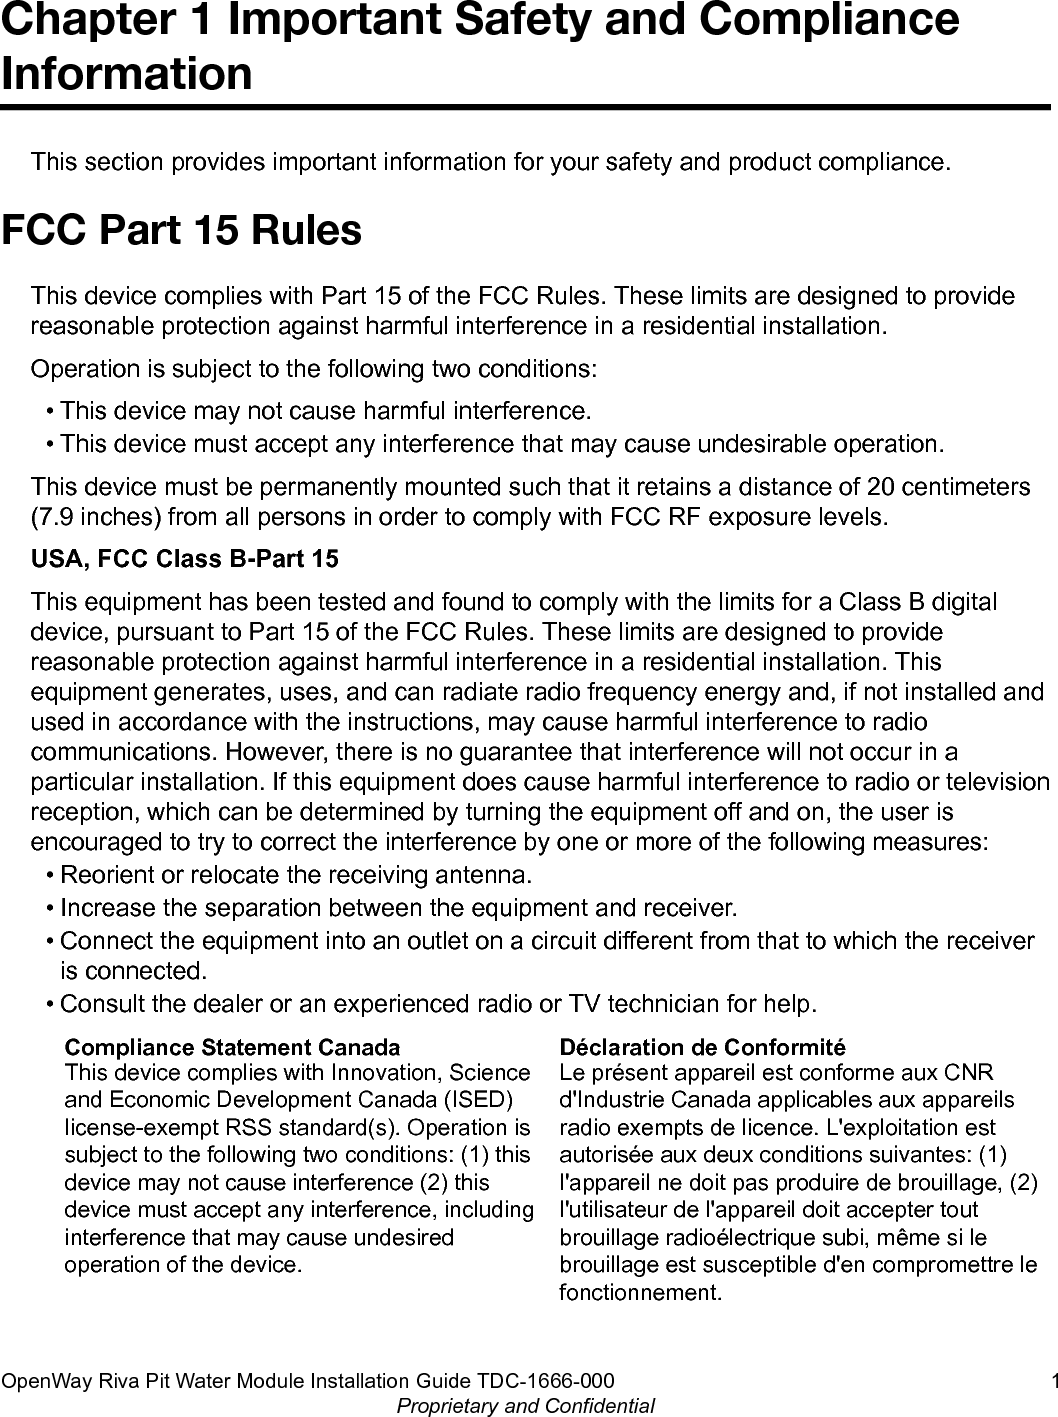 Chapter 1 Important Safety and ComplianceInformationThis section provides important information for your safety and product compliance.FCC Part 15 RulesThis device complies with Part 15 of the FCC Rules. These limits are designed to providereasonable protection against harmful interference in a residential installation.Operation is subject to the following two conditions:• This device may not cause harmful interference.• This device must accept any interference that may cause undesirable operation.This device must be permanently mounted such that it retains a distance of 20 centimeters(7.9 inches) from all persons in order to comply with FCC RF exposure levels.USA, FCC Class B-Part 15This equipment has been tested and found to comply with the limits for a Class B digitaldevice, pursuant to Part 15 of the FCC Rules. These limits are designed to providereasonable protection against harmful interference in a residential installation. Thisequipment generates, uses, and can radiate radio frequency energy and, if not installed andused in accordance with the instructions, may cause harmful interference to radiocommunications. However, there is no guarantee that interference will not occur in aparticular installation. If this equipment does cause harmful interference to radio or televisionreception, which can be determined by turning the equipment off and on, the user isencouraged to try to correct the interference by one or more of the following measures:• Reorient or relocate the receiving antenna.• Increase the separation between the equipment and receiver.• Connect the equipment into an outlet on a circuit different from that to which the receiveris connected.• Consult the dealer or an experienced radio or TV technician for help.Compliance Statement CanadaThis device complies with Innovation, Scienceand Economic Development Canada (ISED)license-exempt RSS standard(s). Operation issubject to the following two conditions: (1) thisdevice may not cause interference (2) thisdevice must accept any interference, includinginterference that may cause undesiredoperation of the device.Déclaration de ConformitéLe présent appareil est conforme aux CNRd&apos;Industrie Canada applicables aux appareilsradio exempts de licence. L&apos;exploitation estautorisée aux deux conditions suivantes: (1)l&apos;appareil ne doit pas produire de brouillage, (2)l&apos;utilisateur de l&apos;appareil doit accepter toutbrouillage radioélectrique subi, même si lebrouillage est susceptible d&apos;en compromettre lefonctionnement.OpenWay Riva Pit Water Module Installation Guide TDC-1666-000 1Proprietary and Confidential